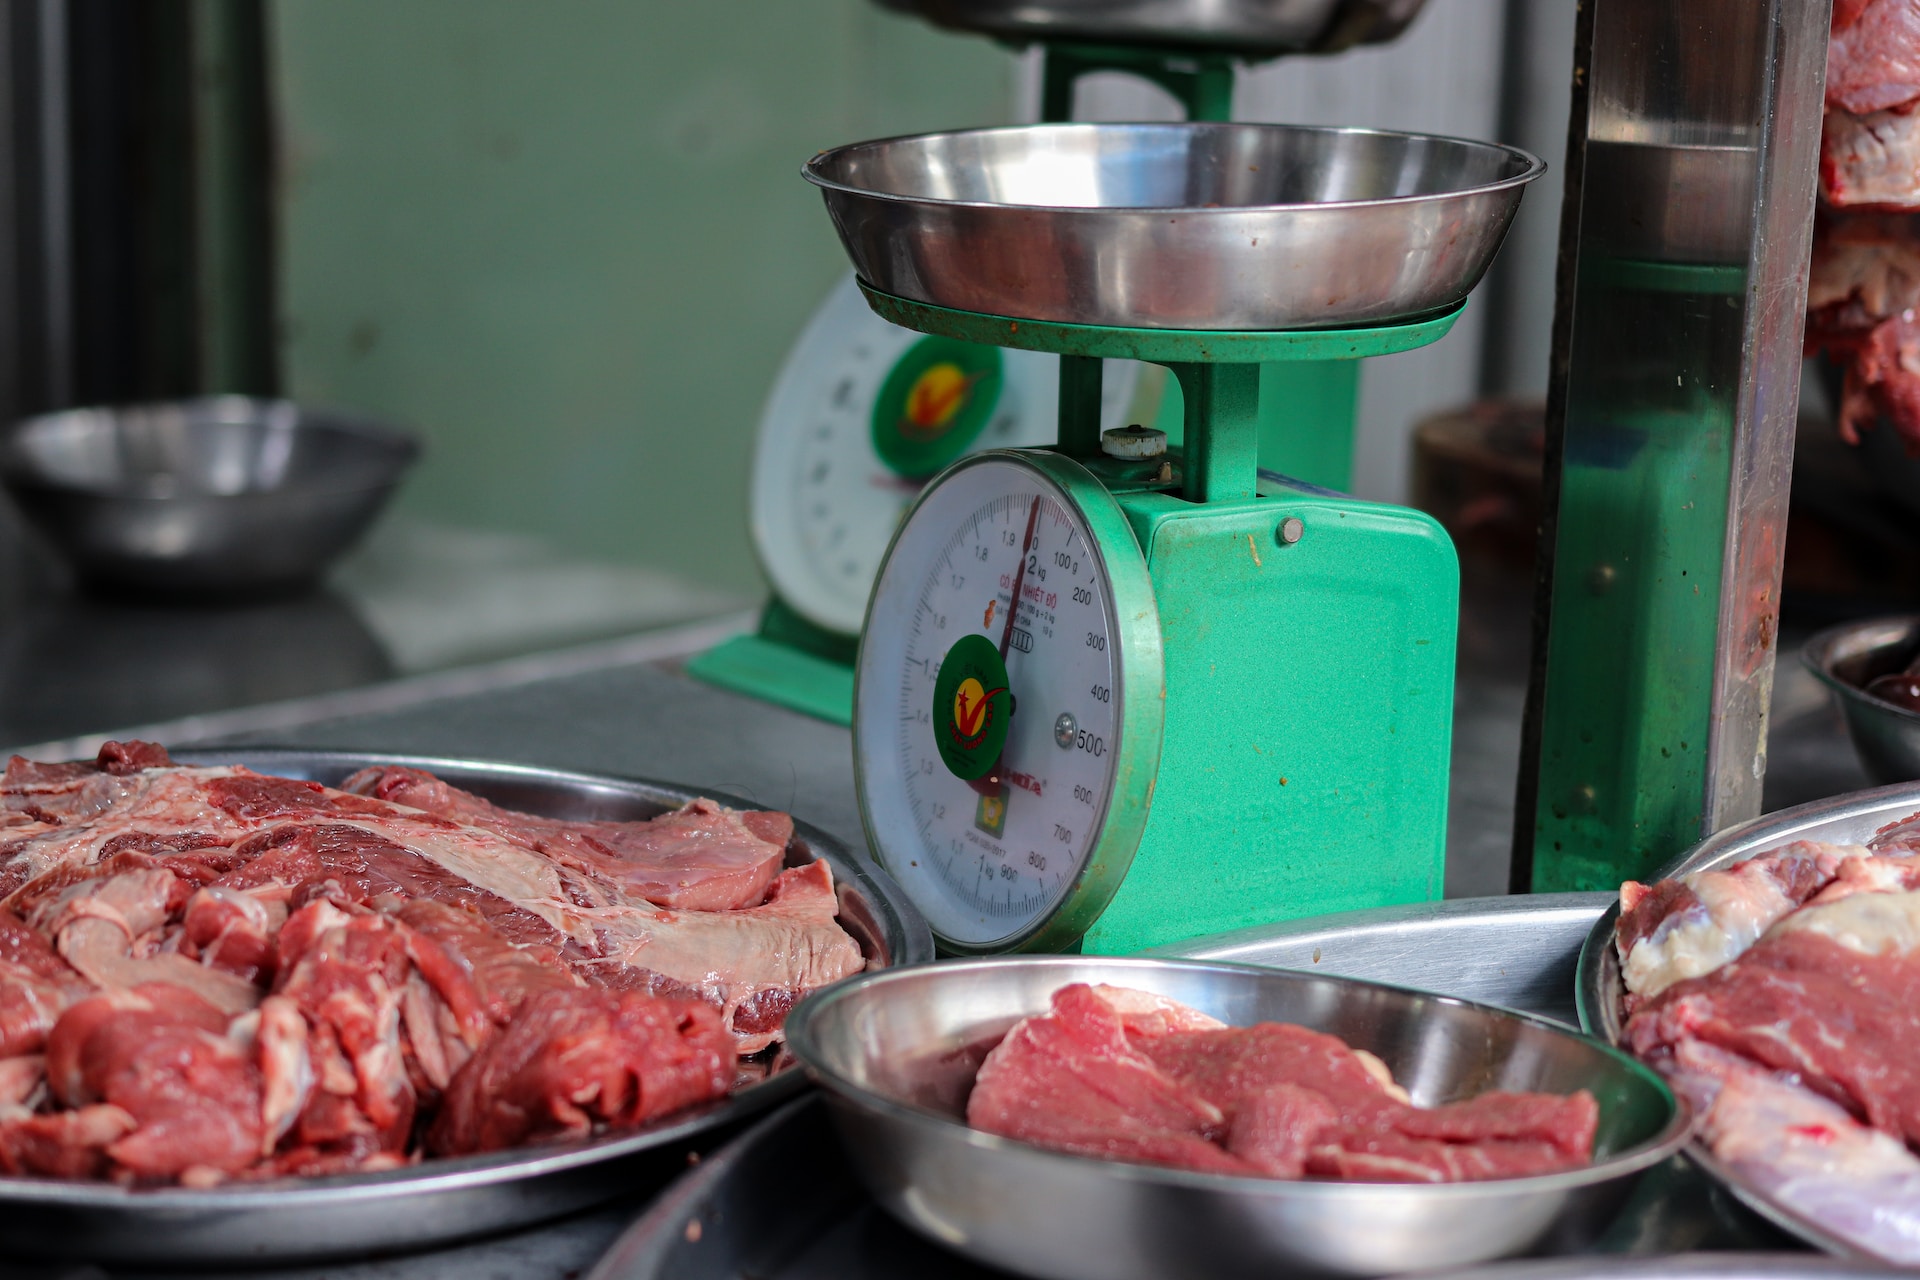 Meat and butcher scale